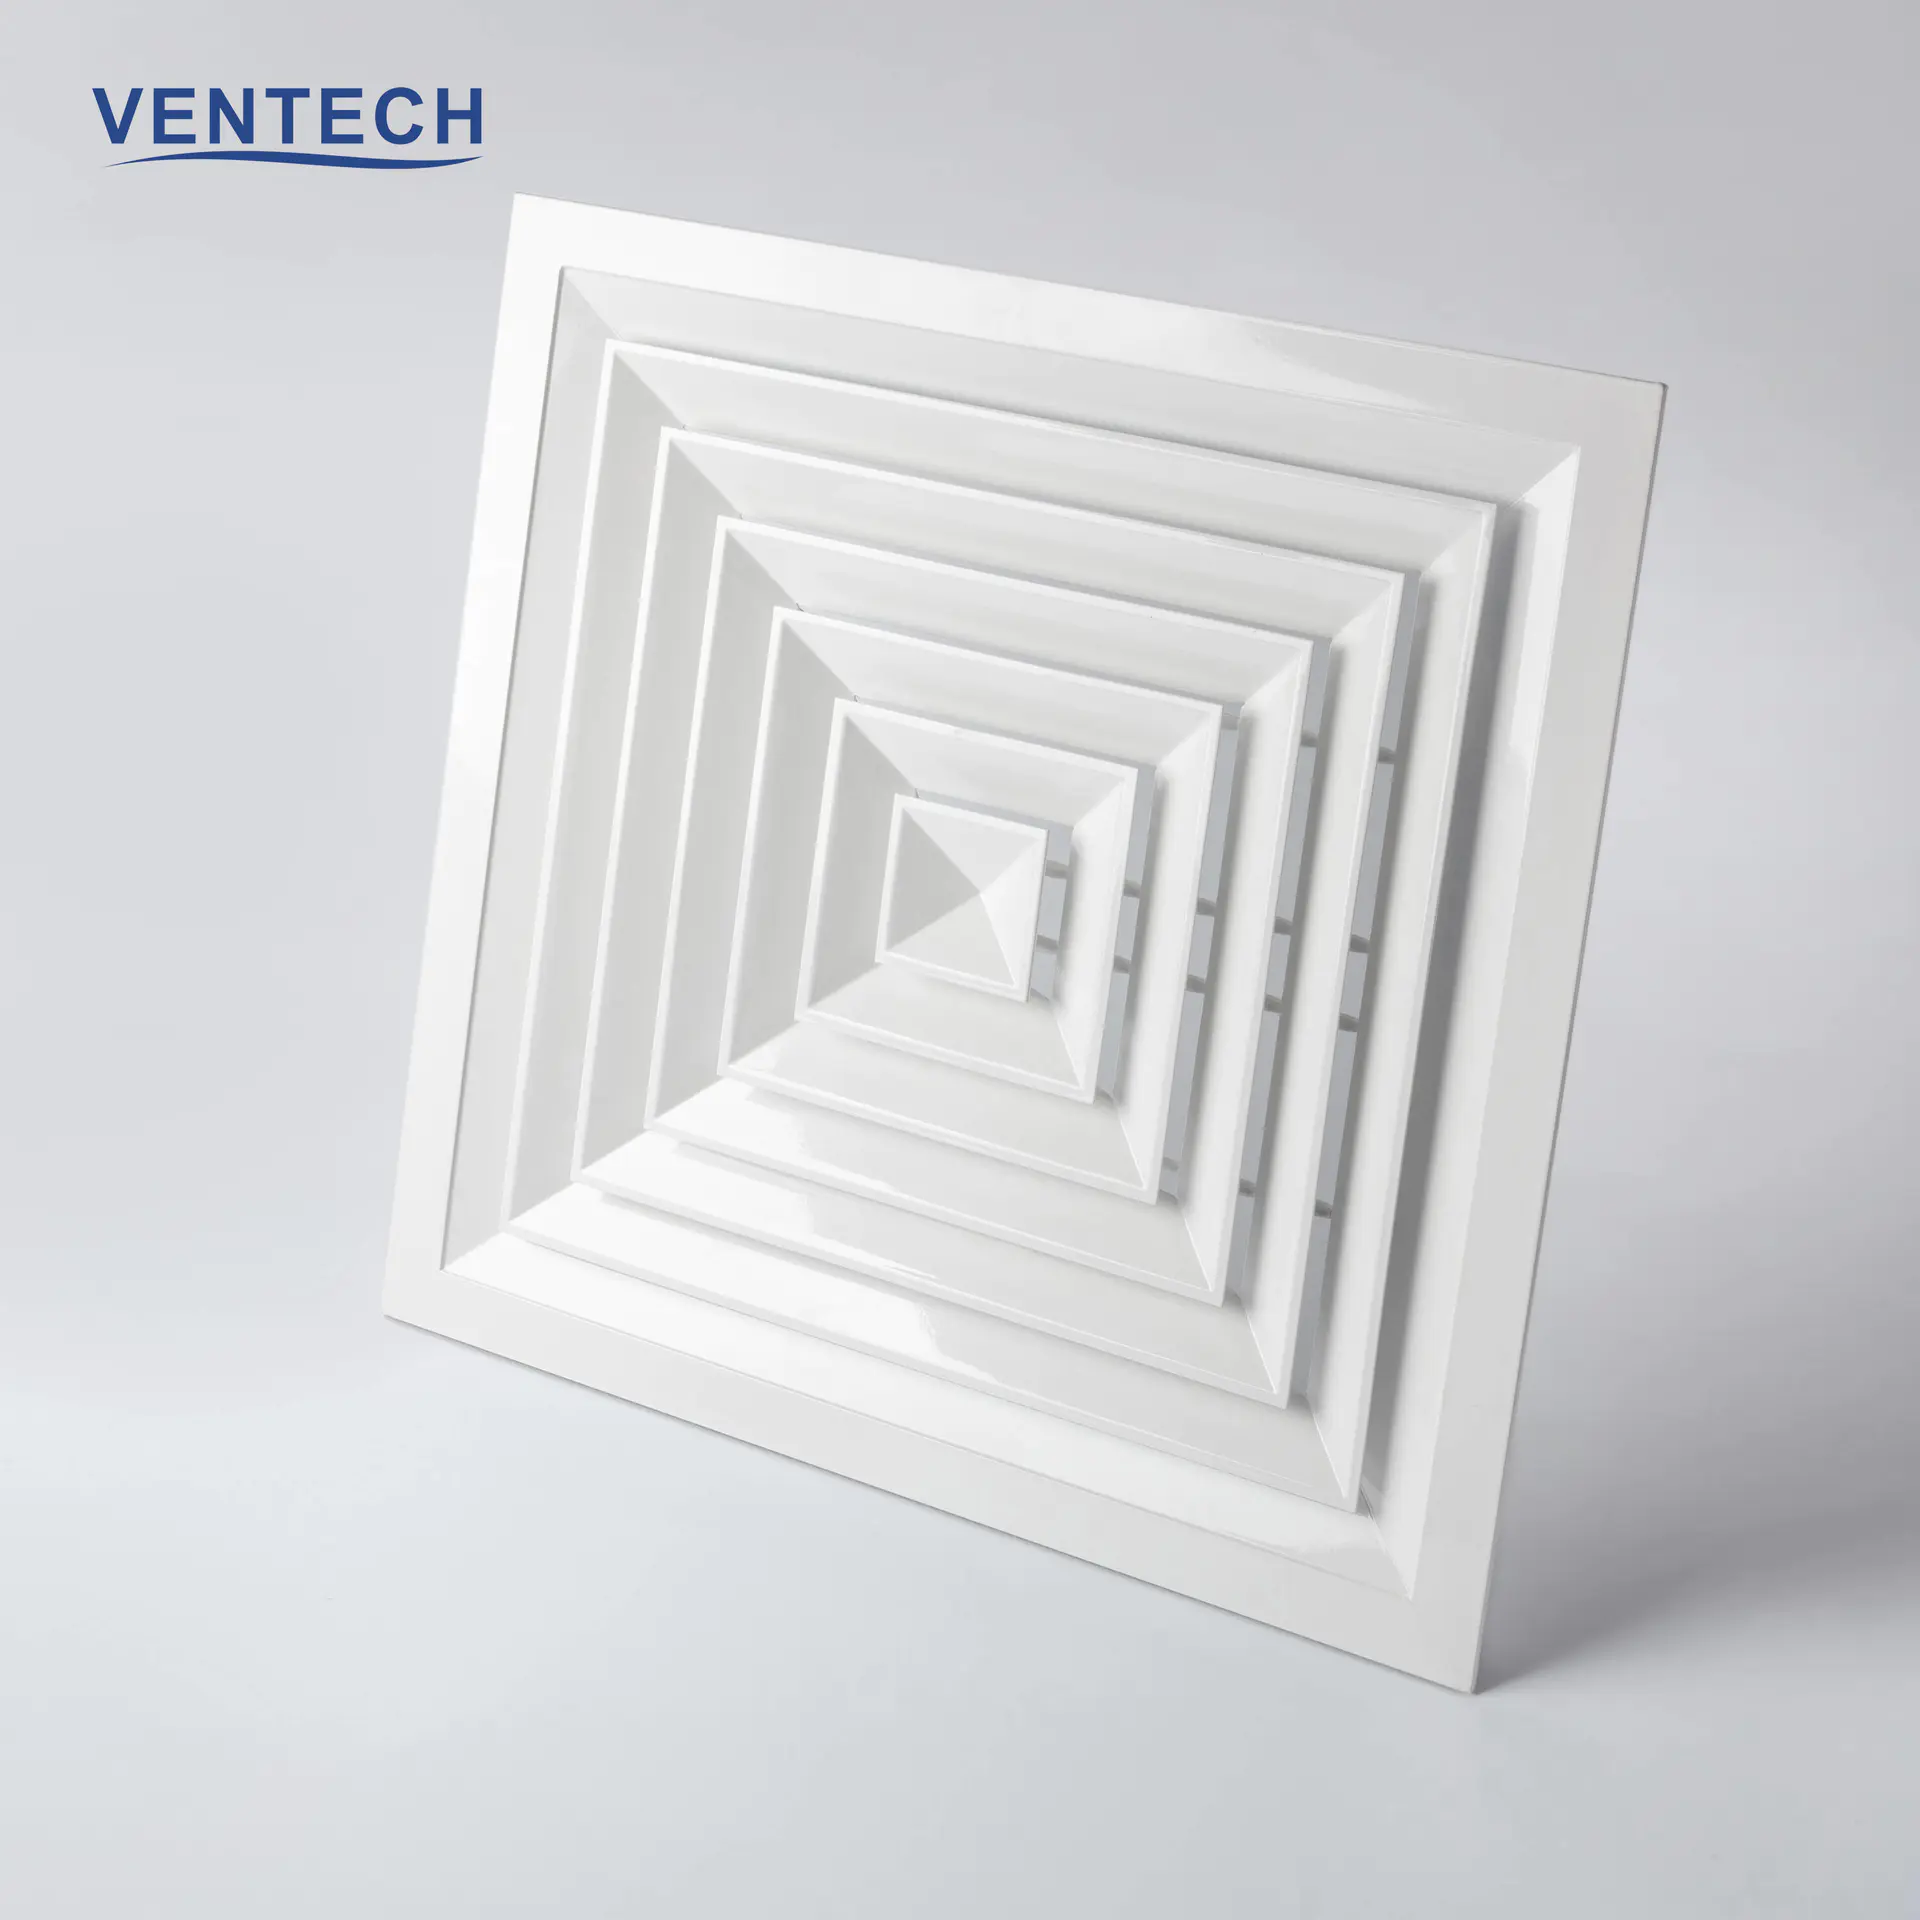 Hvac VENTECH Aluminum Exhaust Air Conditioning Outlet Square Ceiling Air Duct Diffuser